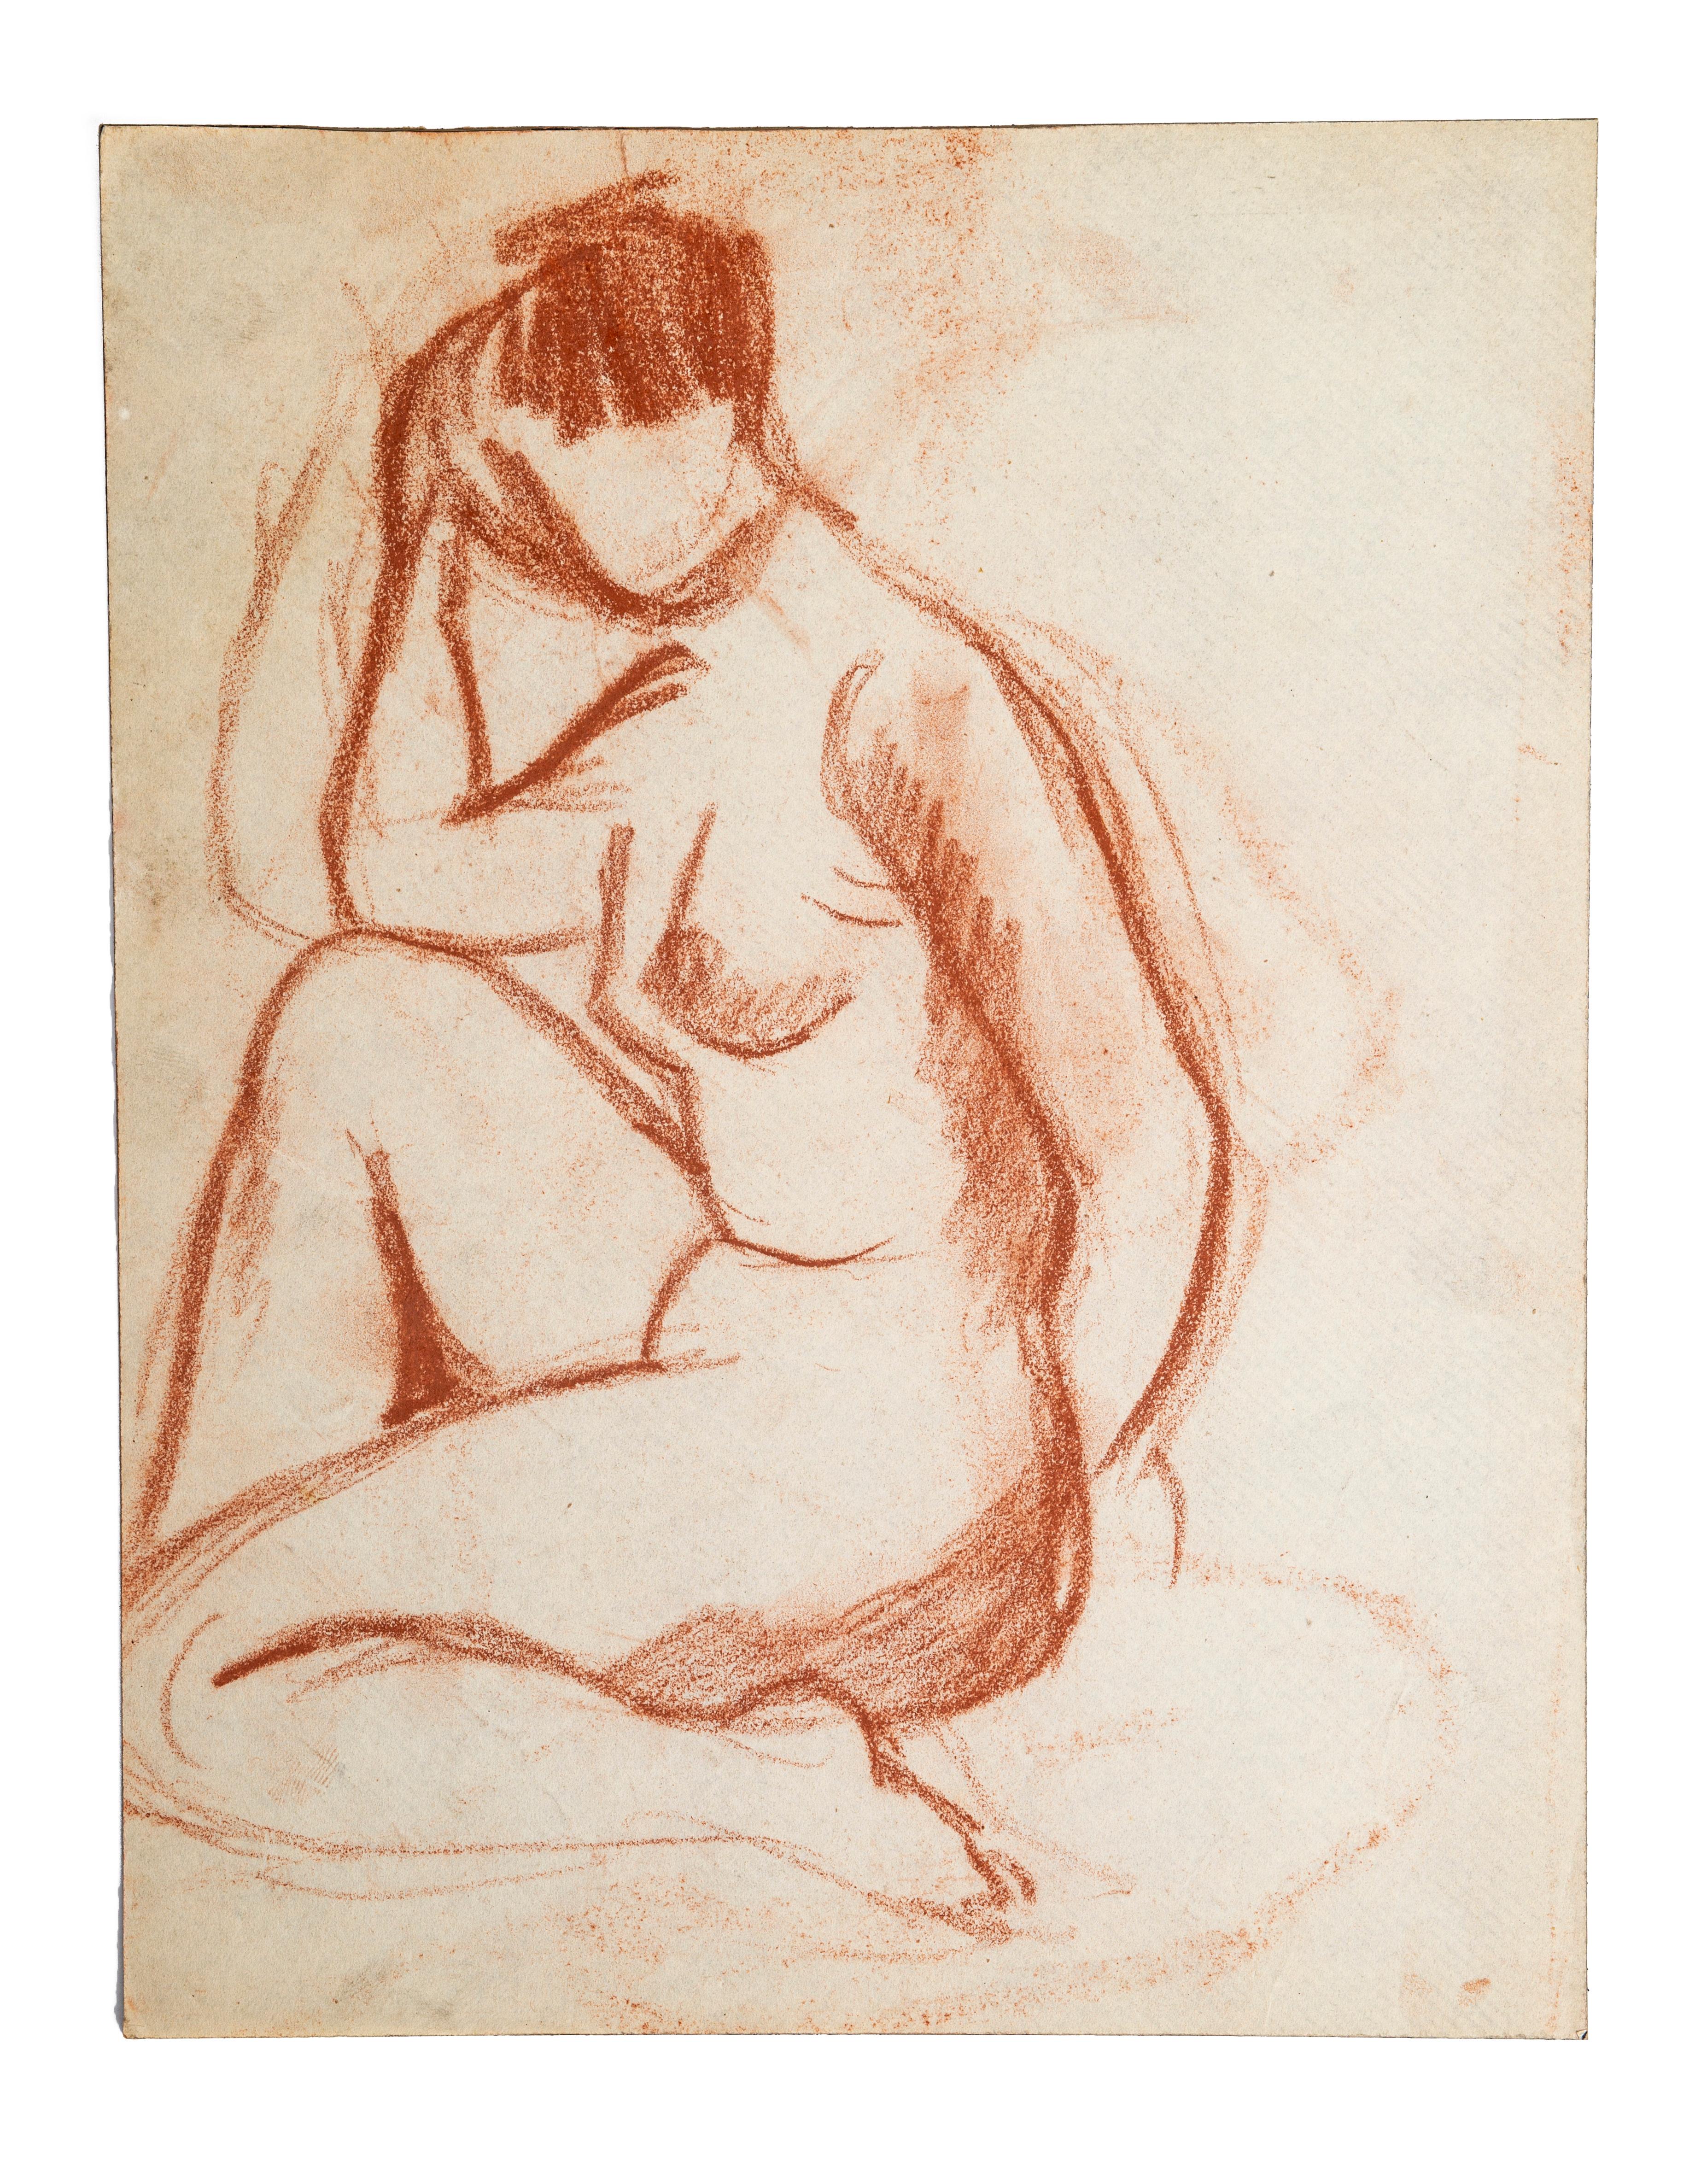 Unknown Figurative Art - Nudes - Original Sanguine Drawing by French Master Early 20th Century